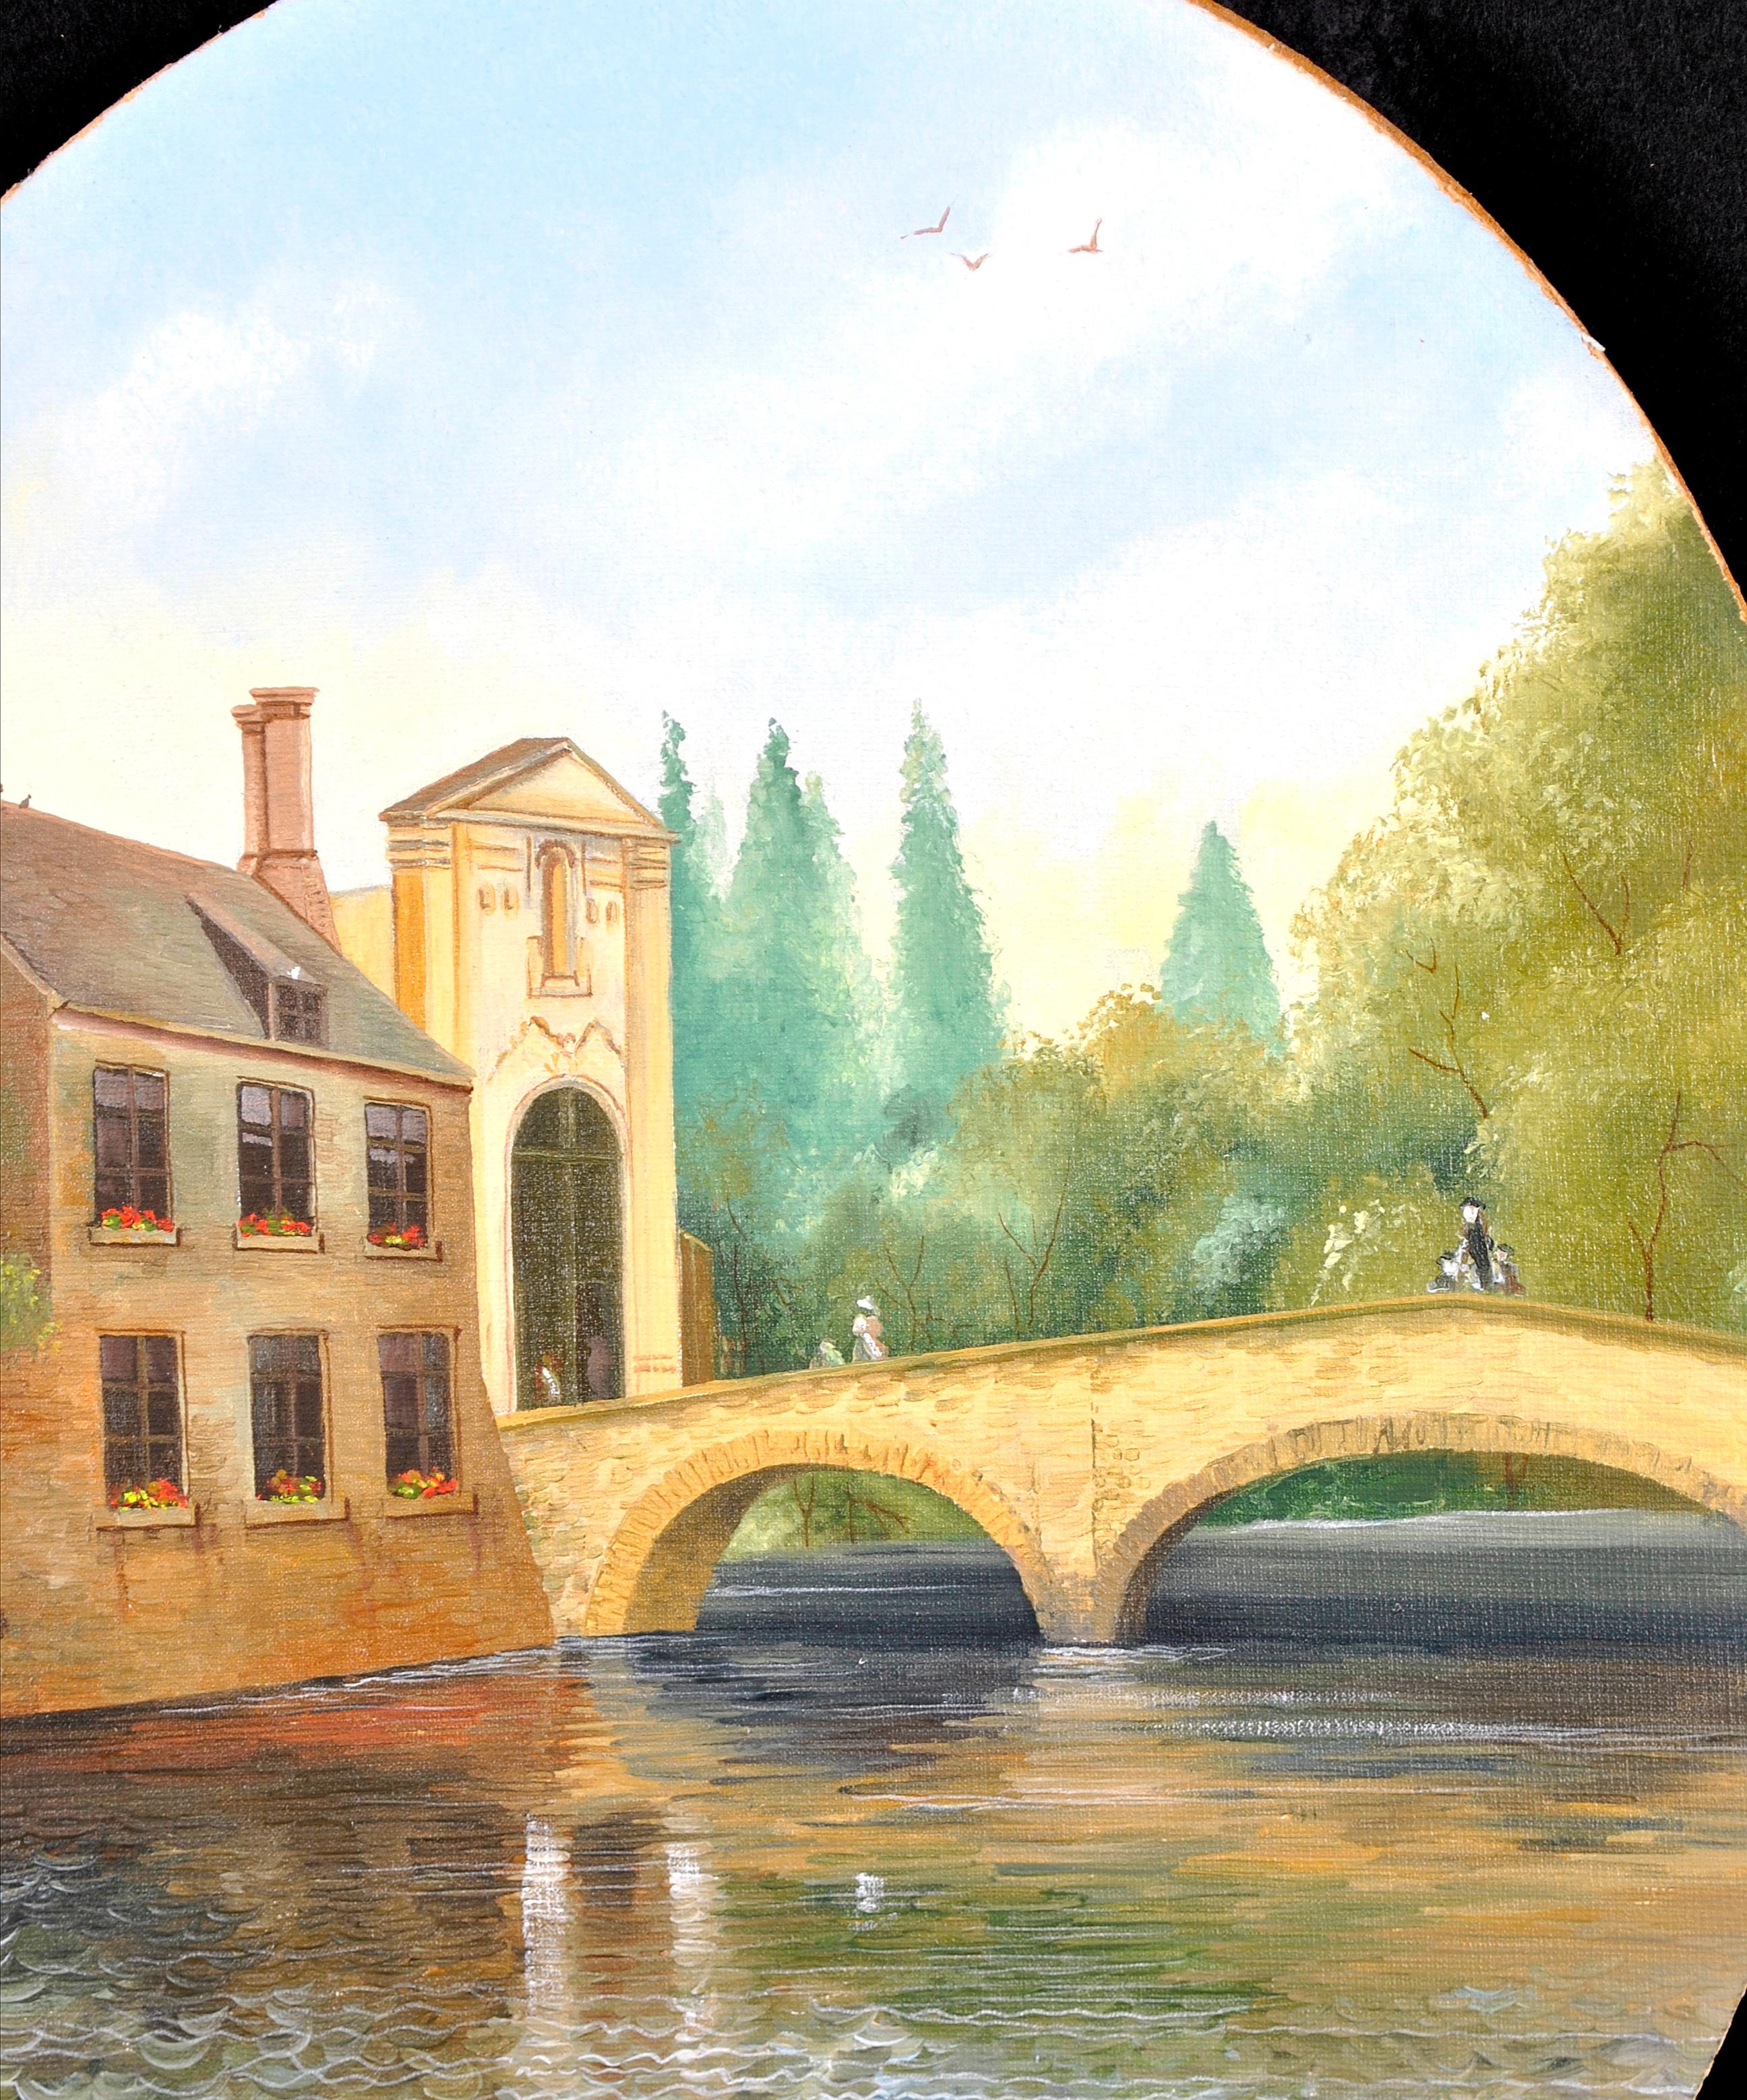 A beautiful 1960's Belgian naif oil on canvas board depicting a bridge, probably in Bruges, with figures and buildings. 

The work is very nicely painted in the naif style and in very good original condition. The waves are a particularly nice